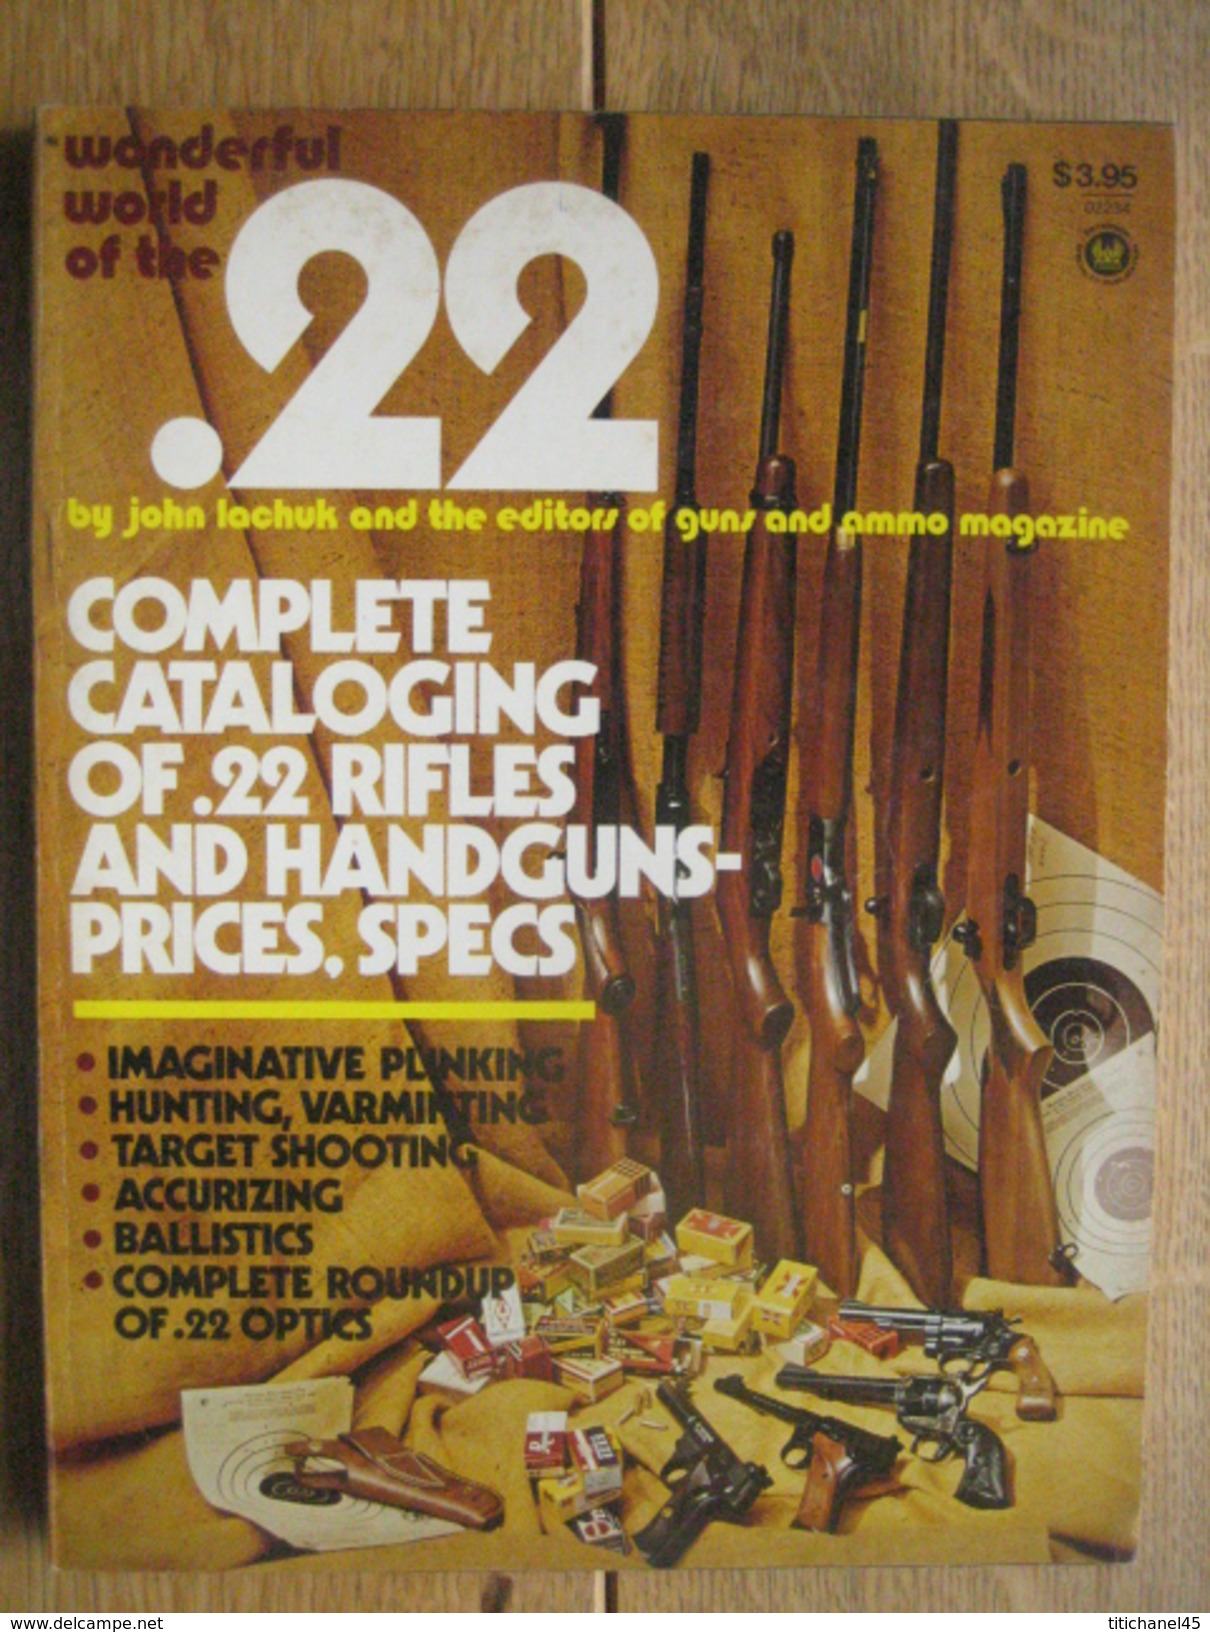 Rare WONDERFUL WORLD OF THE .22 By John LACHUK - COMPLETE CATALOGING OF .22 RIFLES AND HANDGUNS - PRICES, SPECS - Estados Unidos